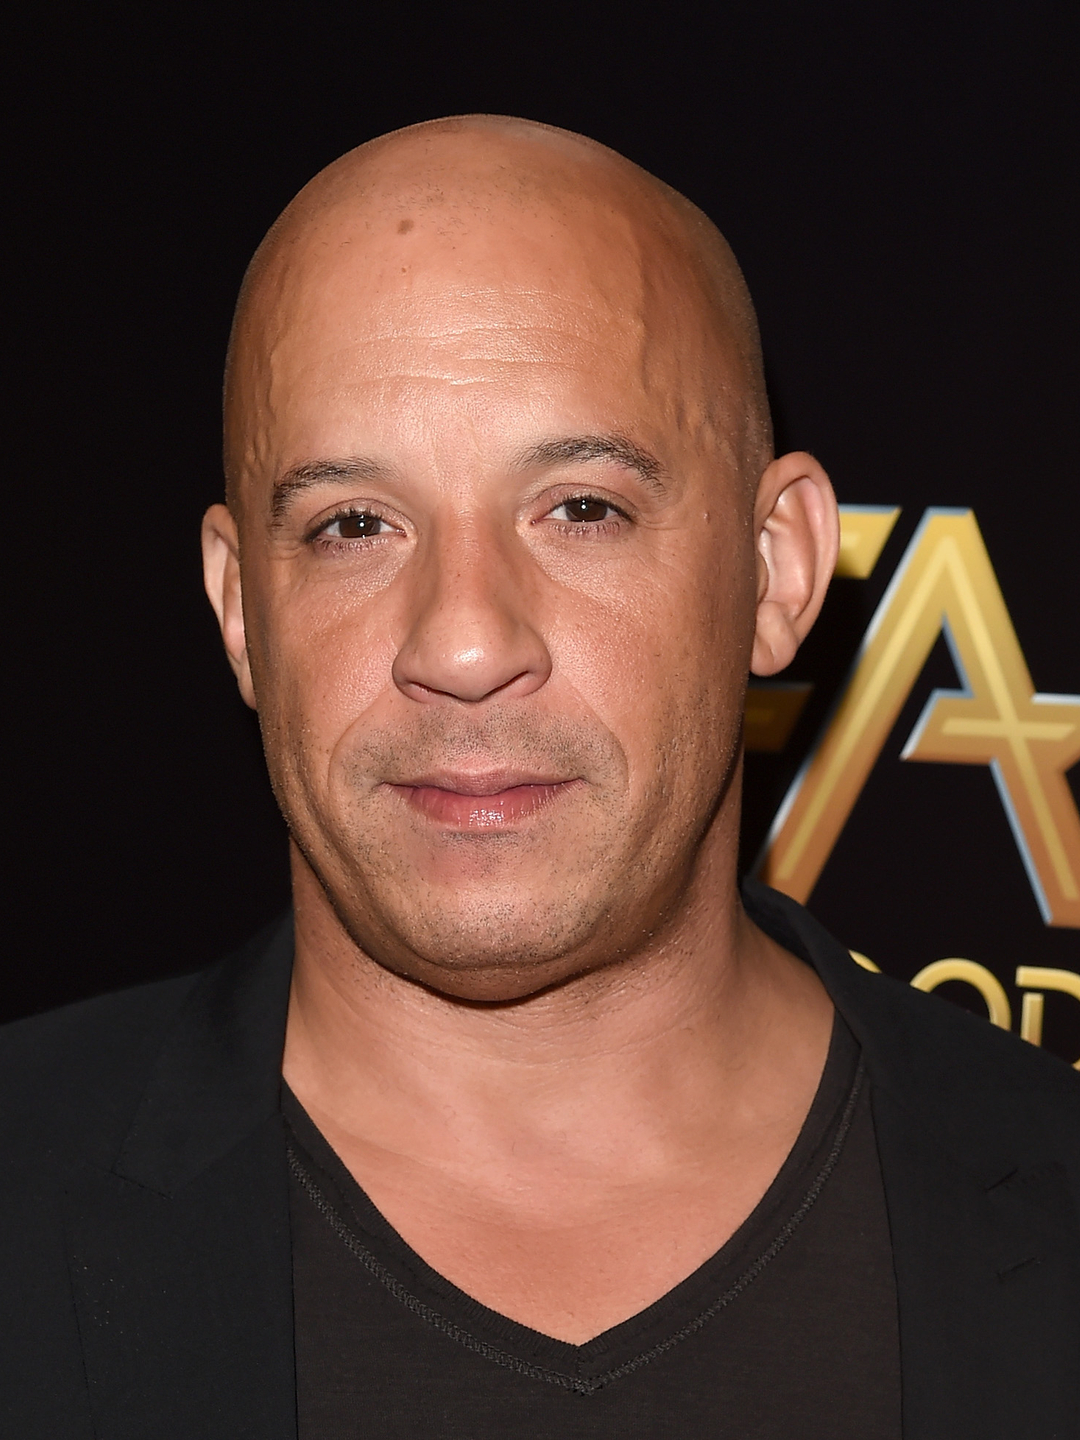 Vin Diesel how did he became famous